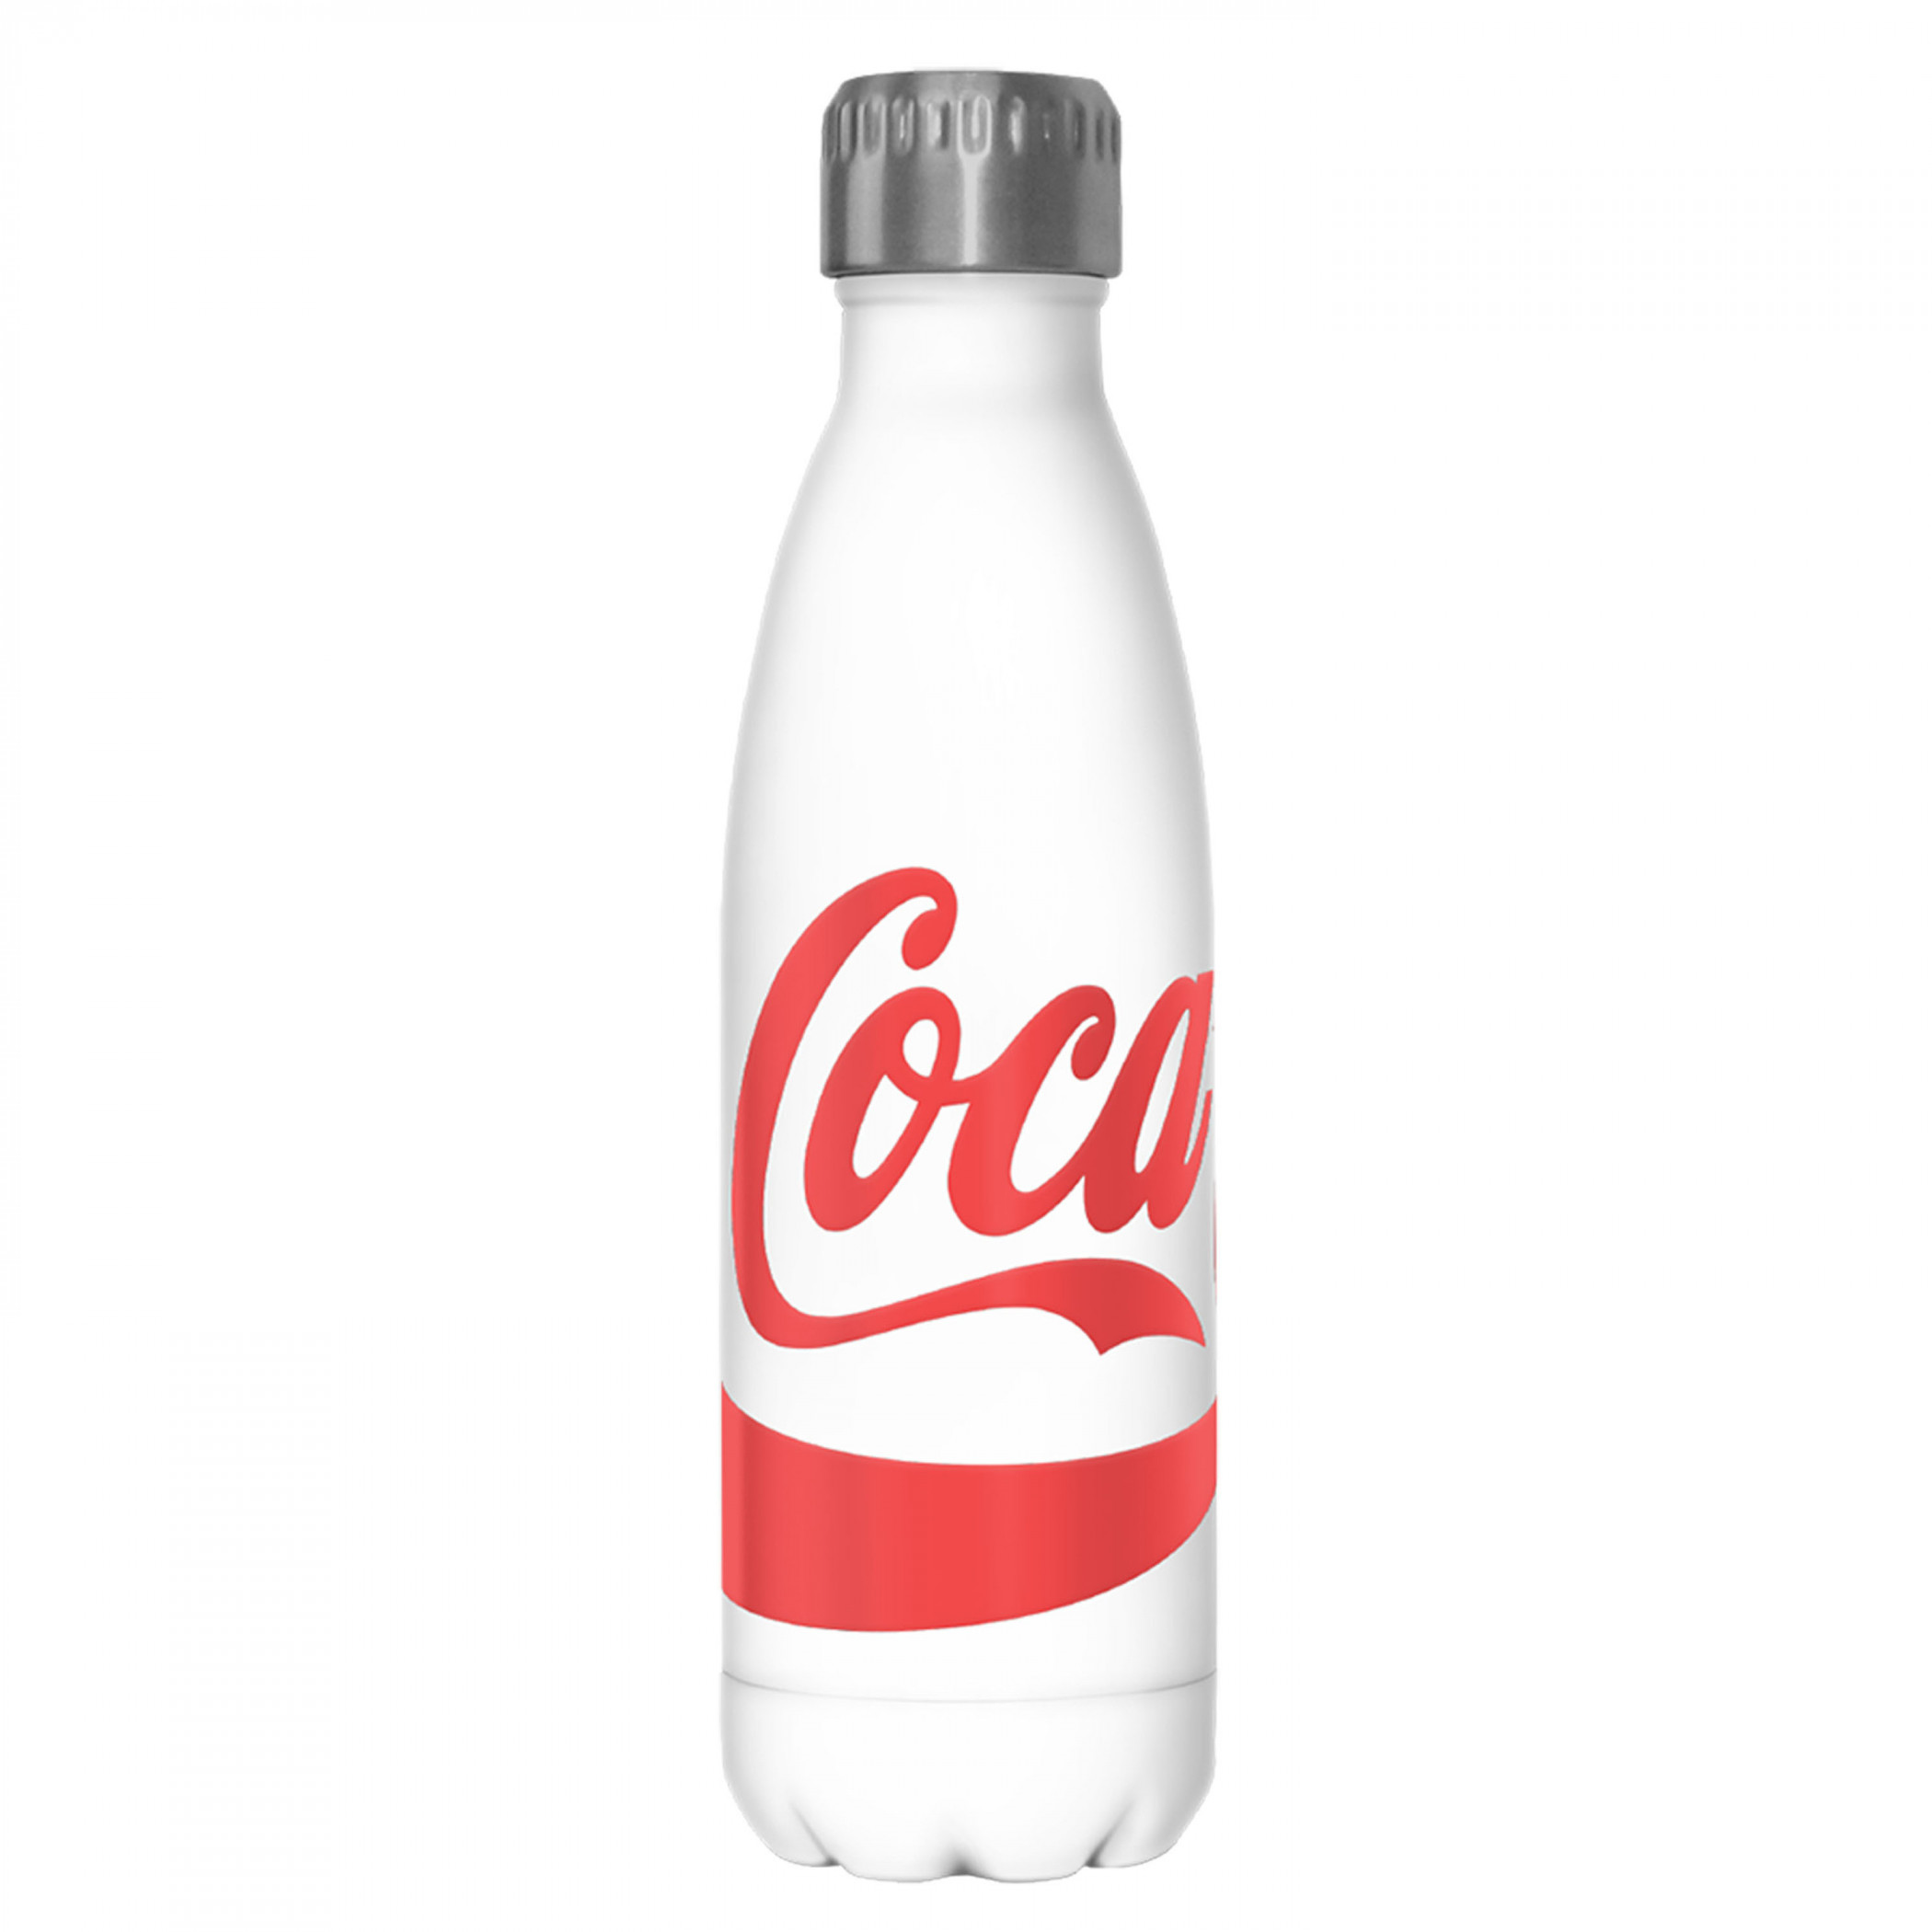 Coca-Cola Large Logo White Colorway 17oz Steel Water Bottle